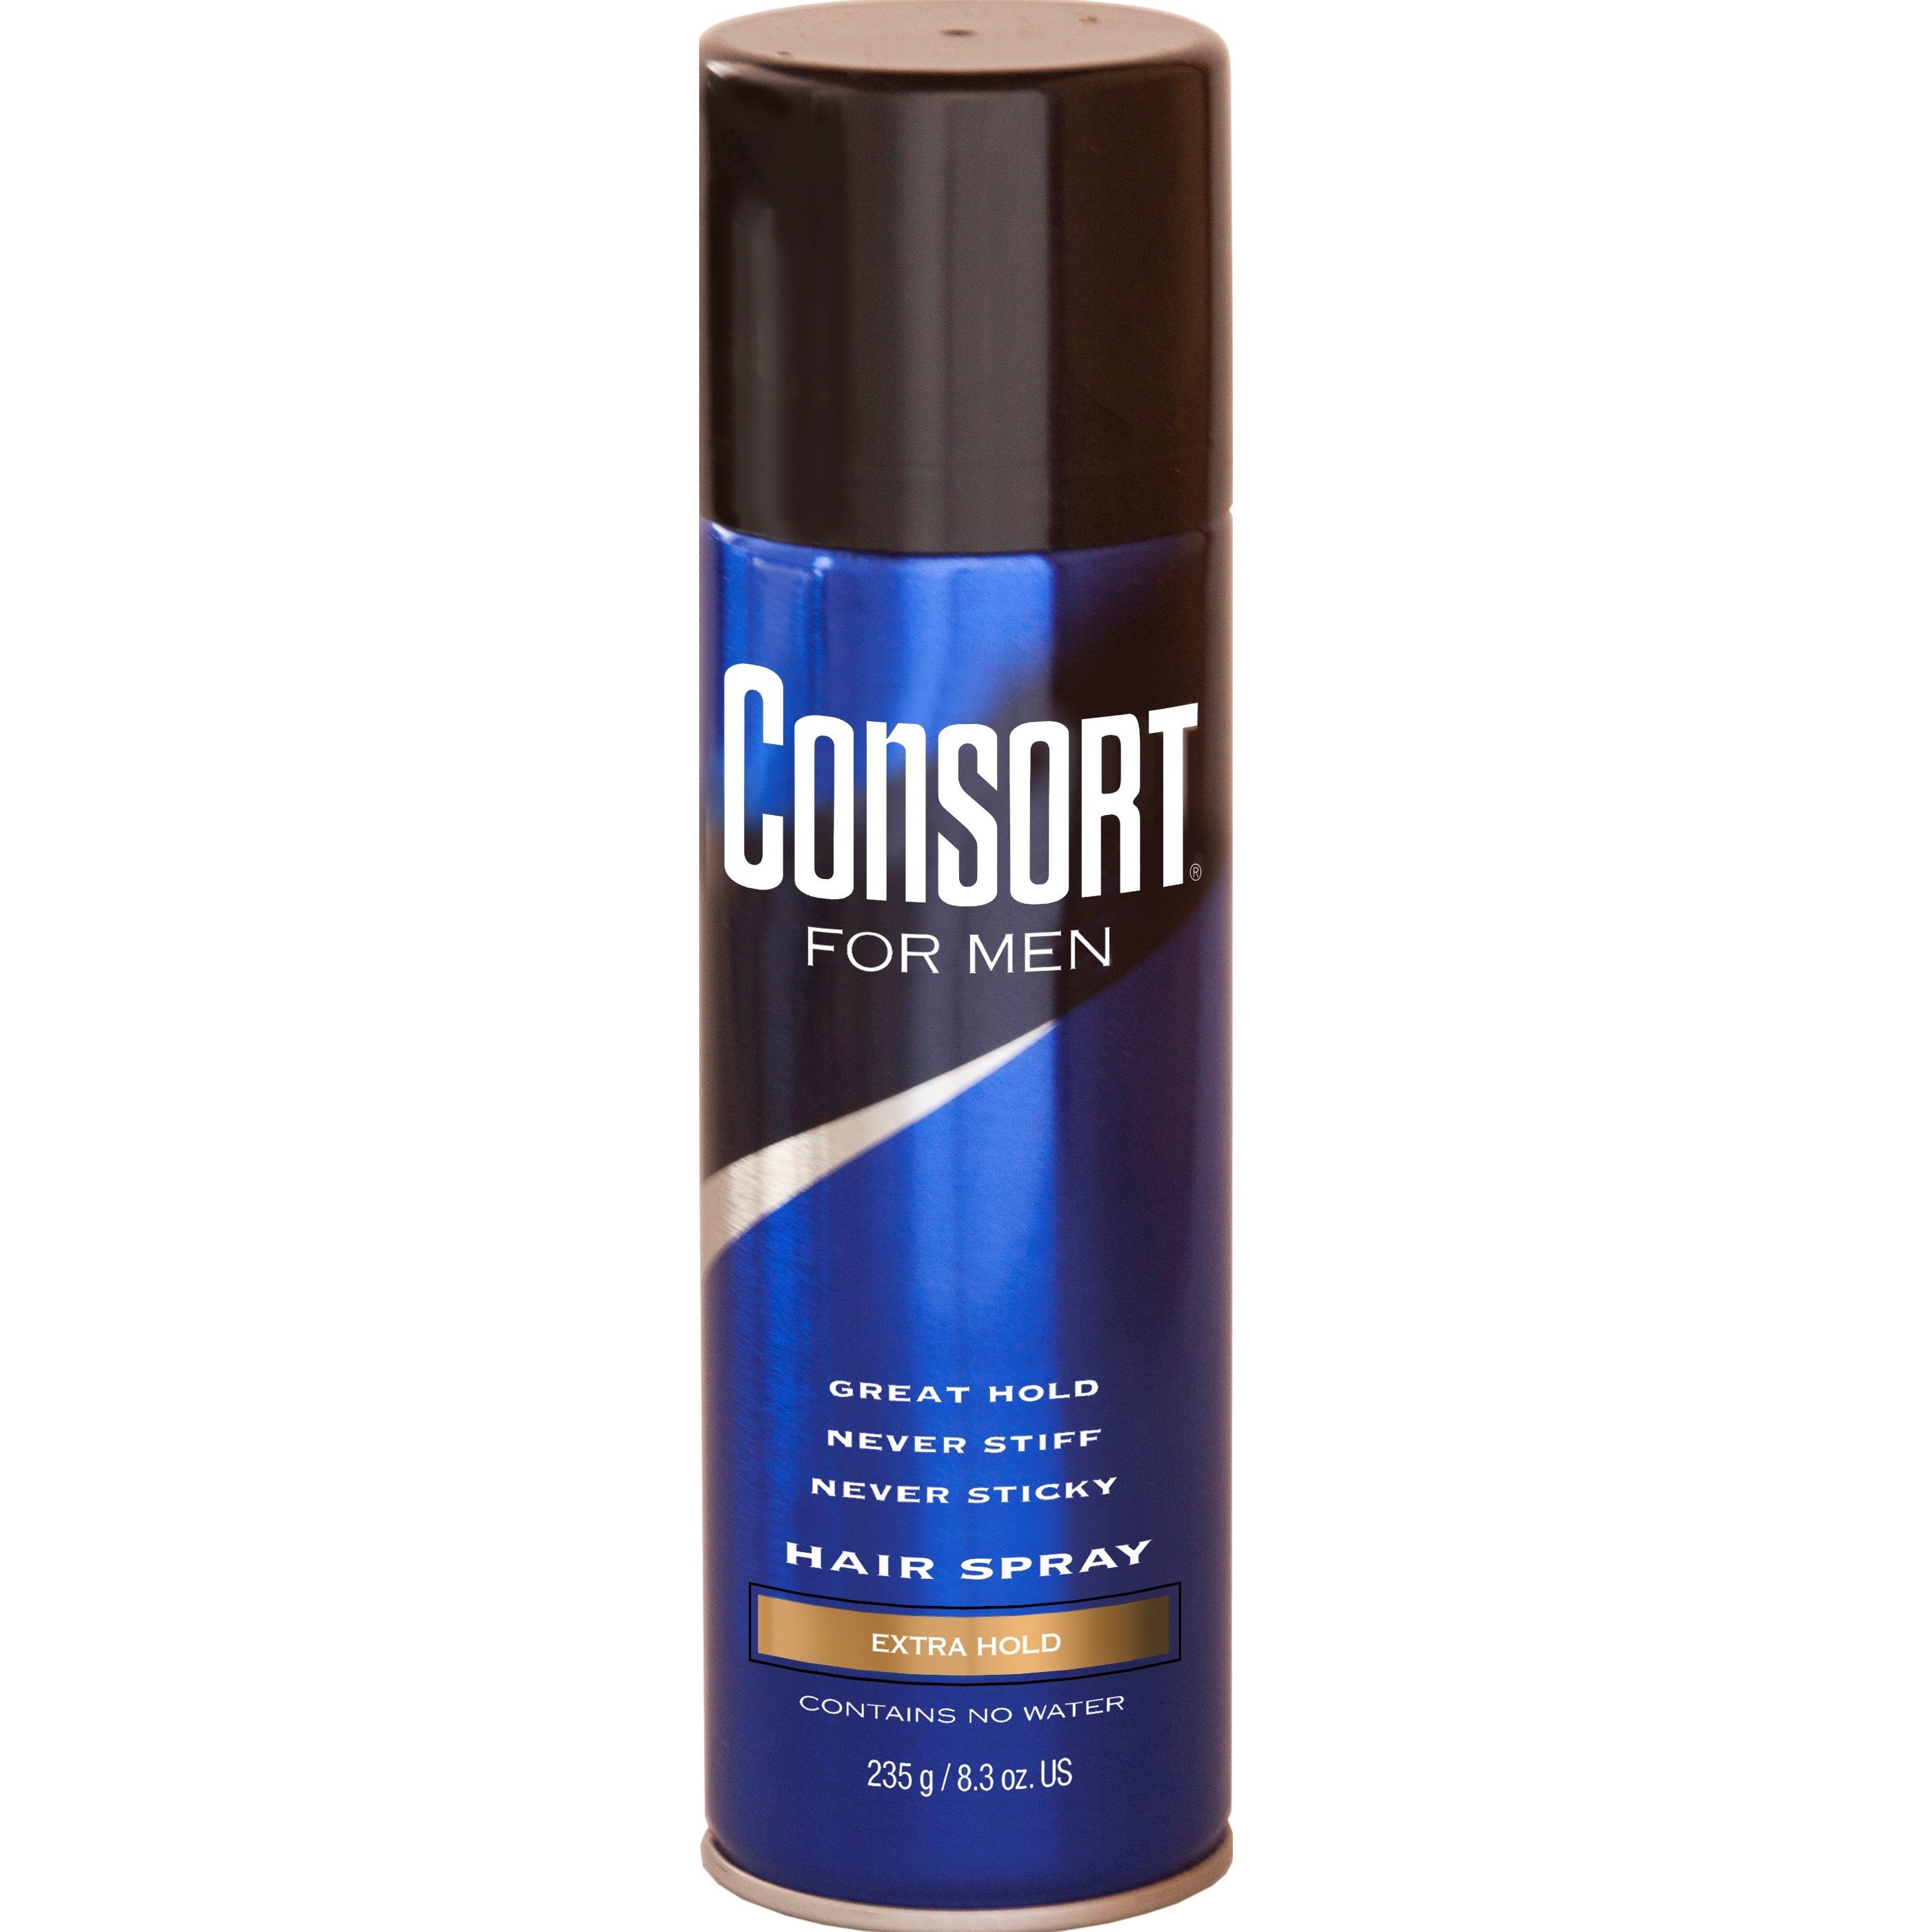 4th Ave Market: Consort For Men Hair Spray, Extra Hold